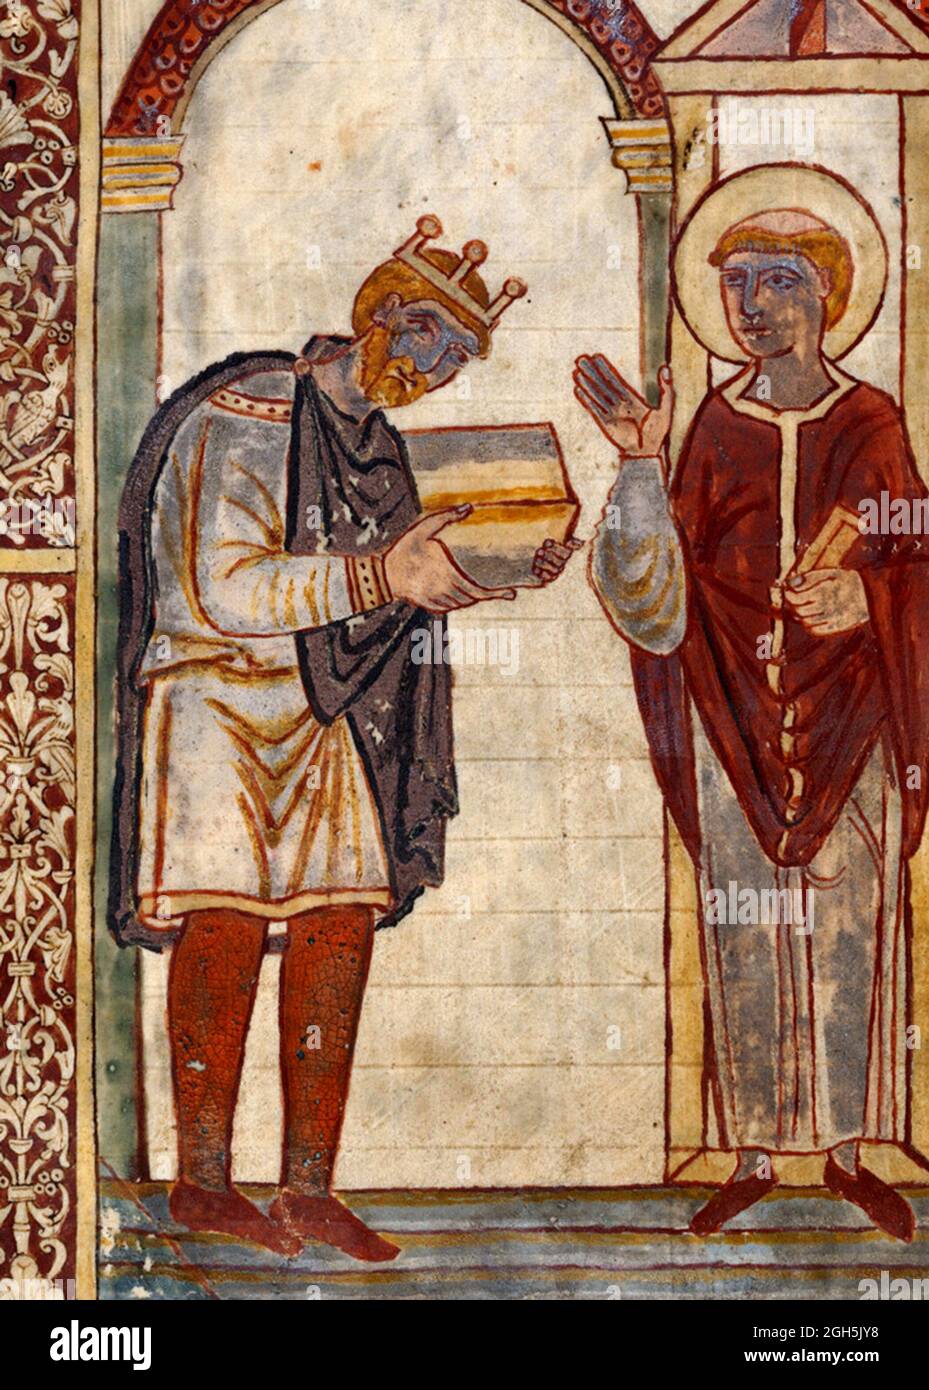 A portrait of Athelstan who was King of England from 924 until 939 presenting a copy of the book Bede's 'Life of St Cuthbert' to the St Cuthbert himself. Stock Photo